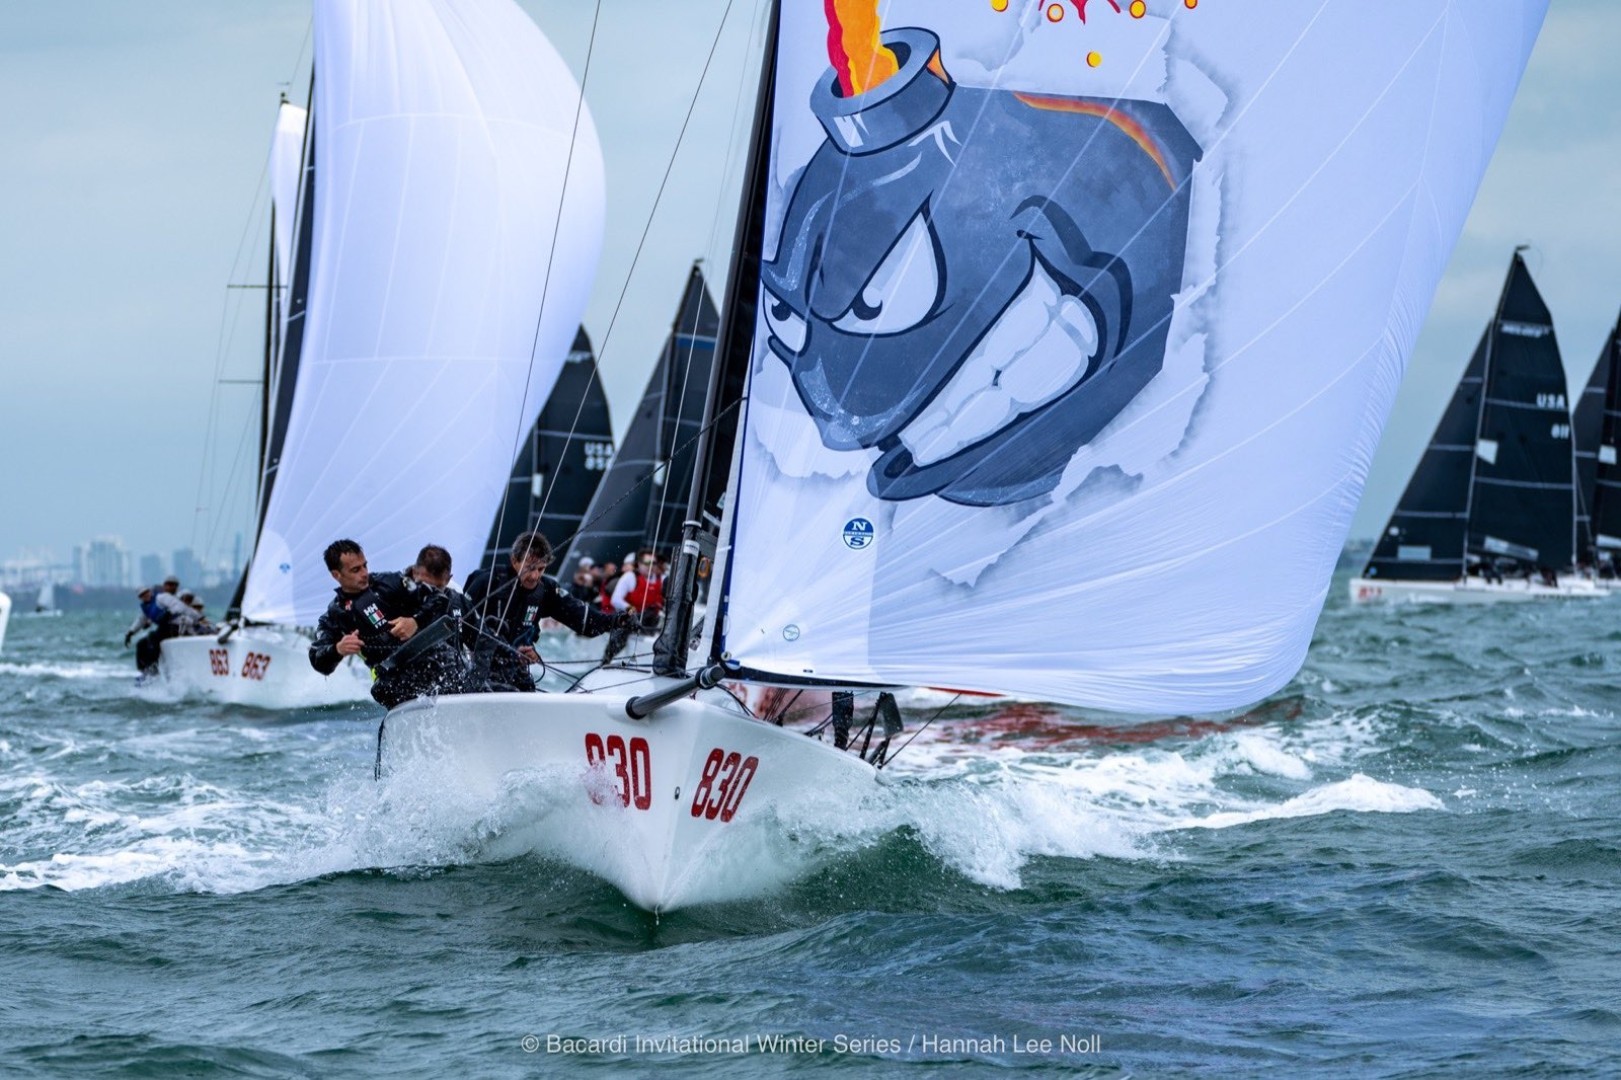 'Bombarda' leads the Melges 24 fleet after 3 races